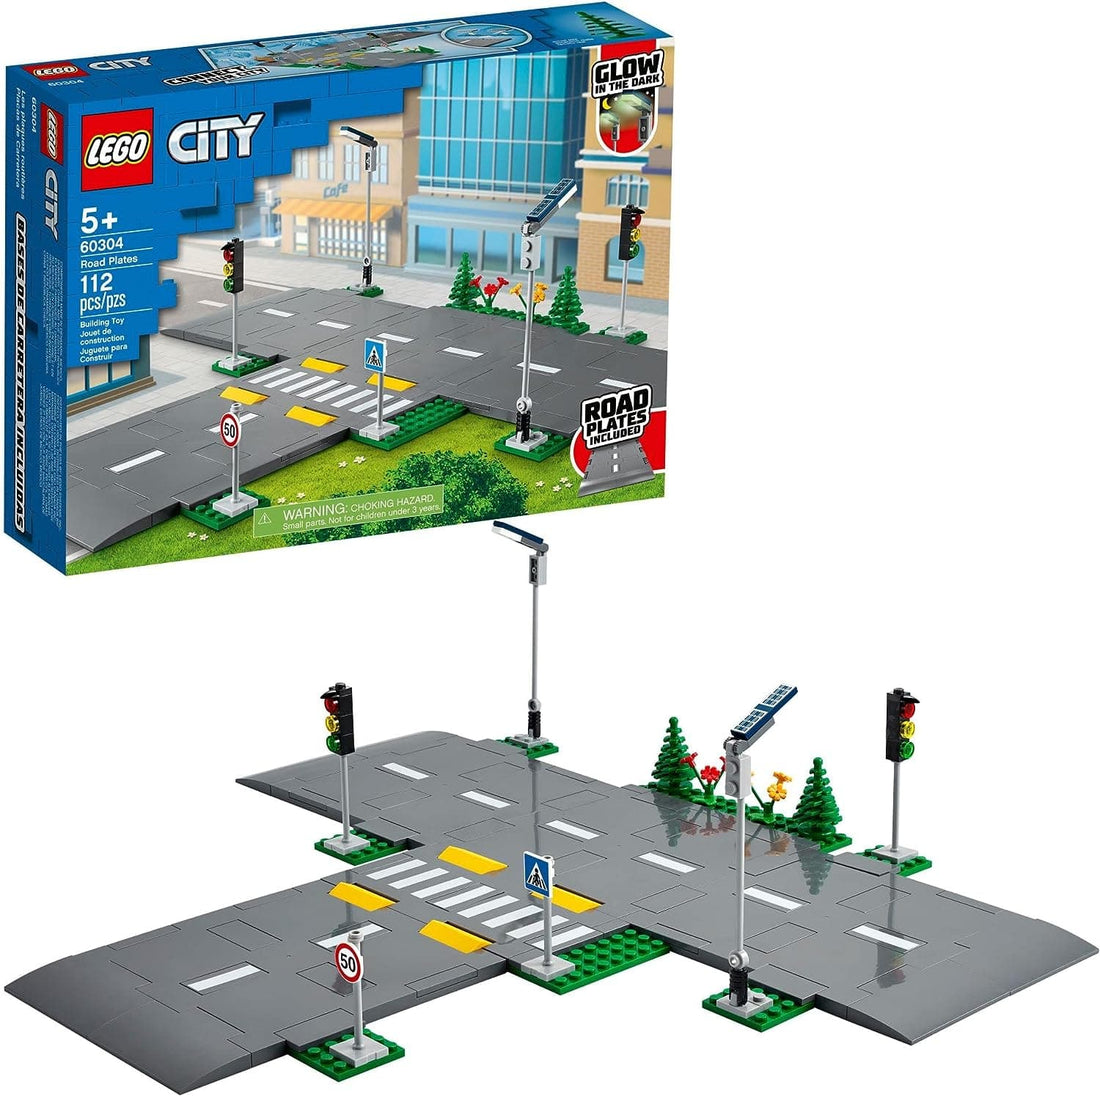 LEGO City Road Plates - Building Toy Set, Featuring Traffic Lights, Trees, Glow in The Dark Bricks, Combine City Series Sets - best price from Maltashopper.com 60304